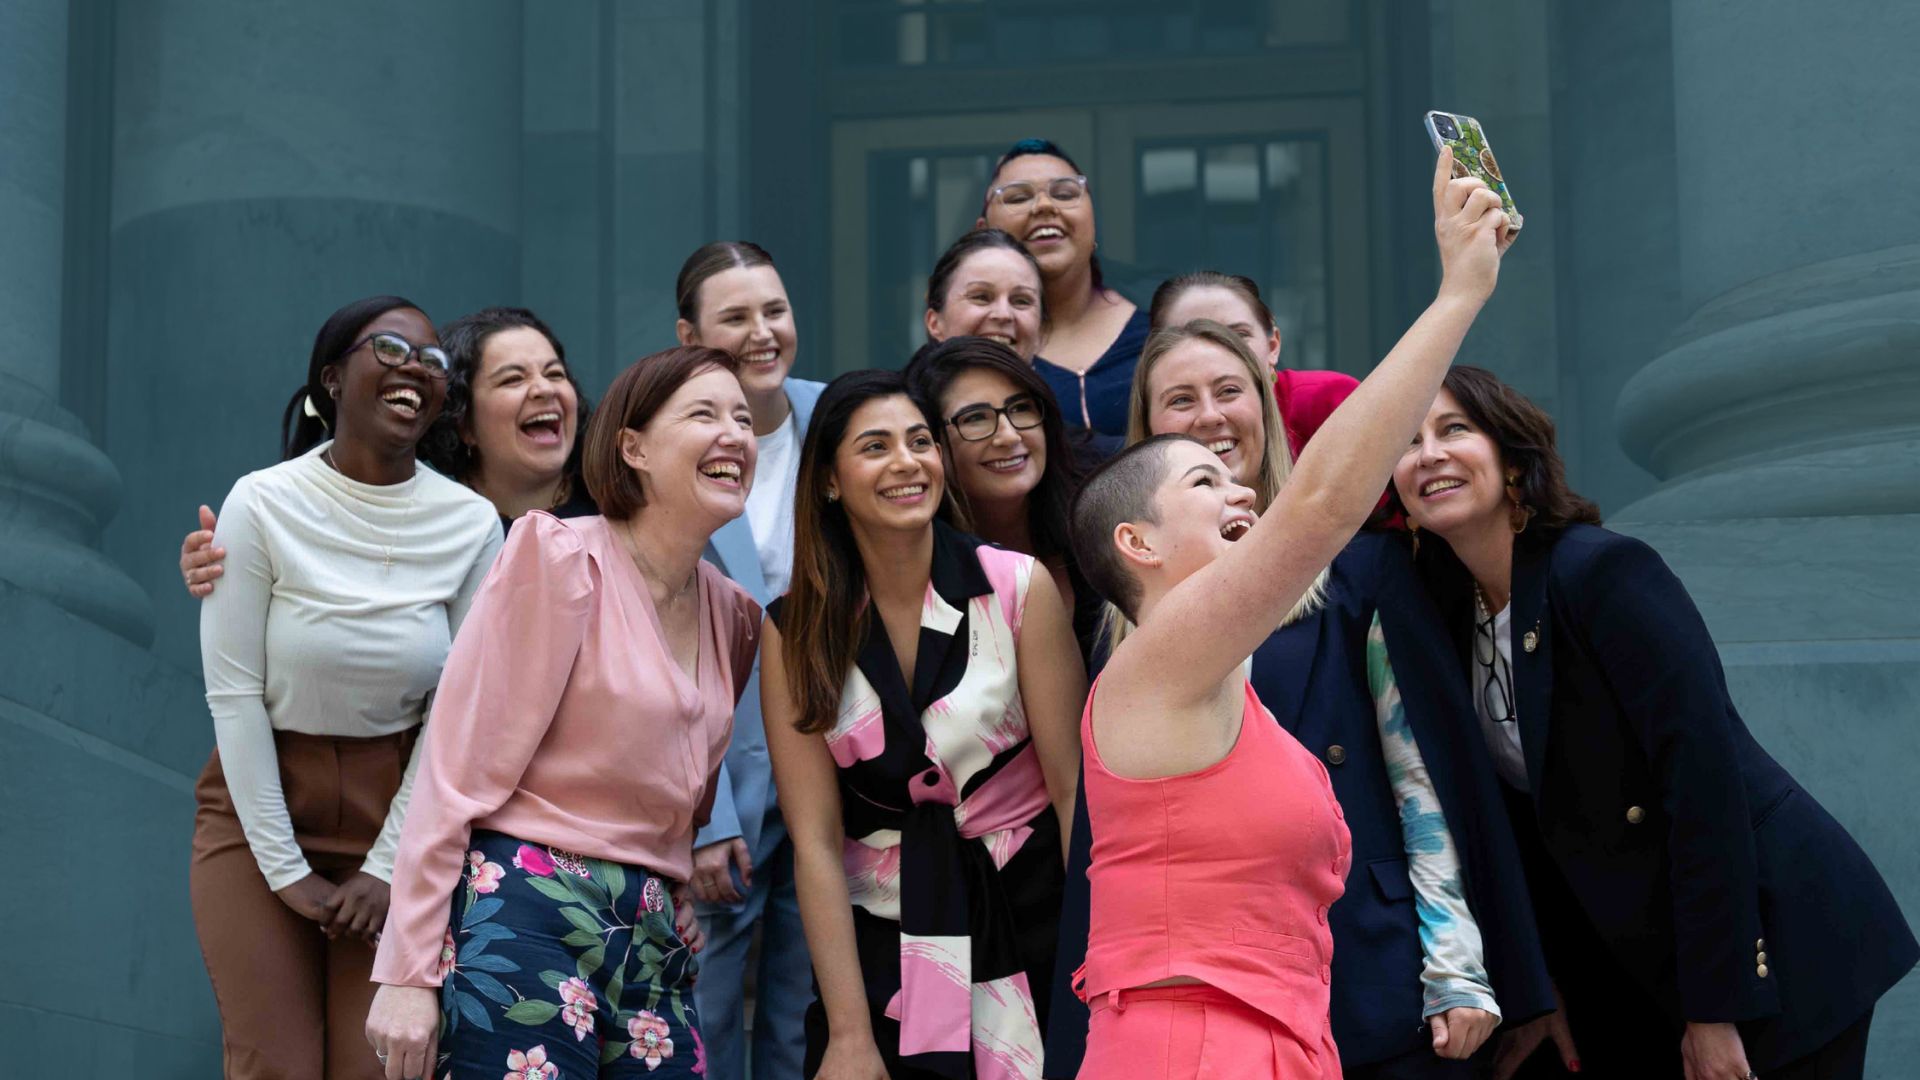 A group of 12 diverse women standing outside a historical parliament building. They are smiling as a young woman in their group takes a selfie of the group.